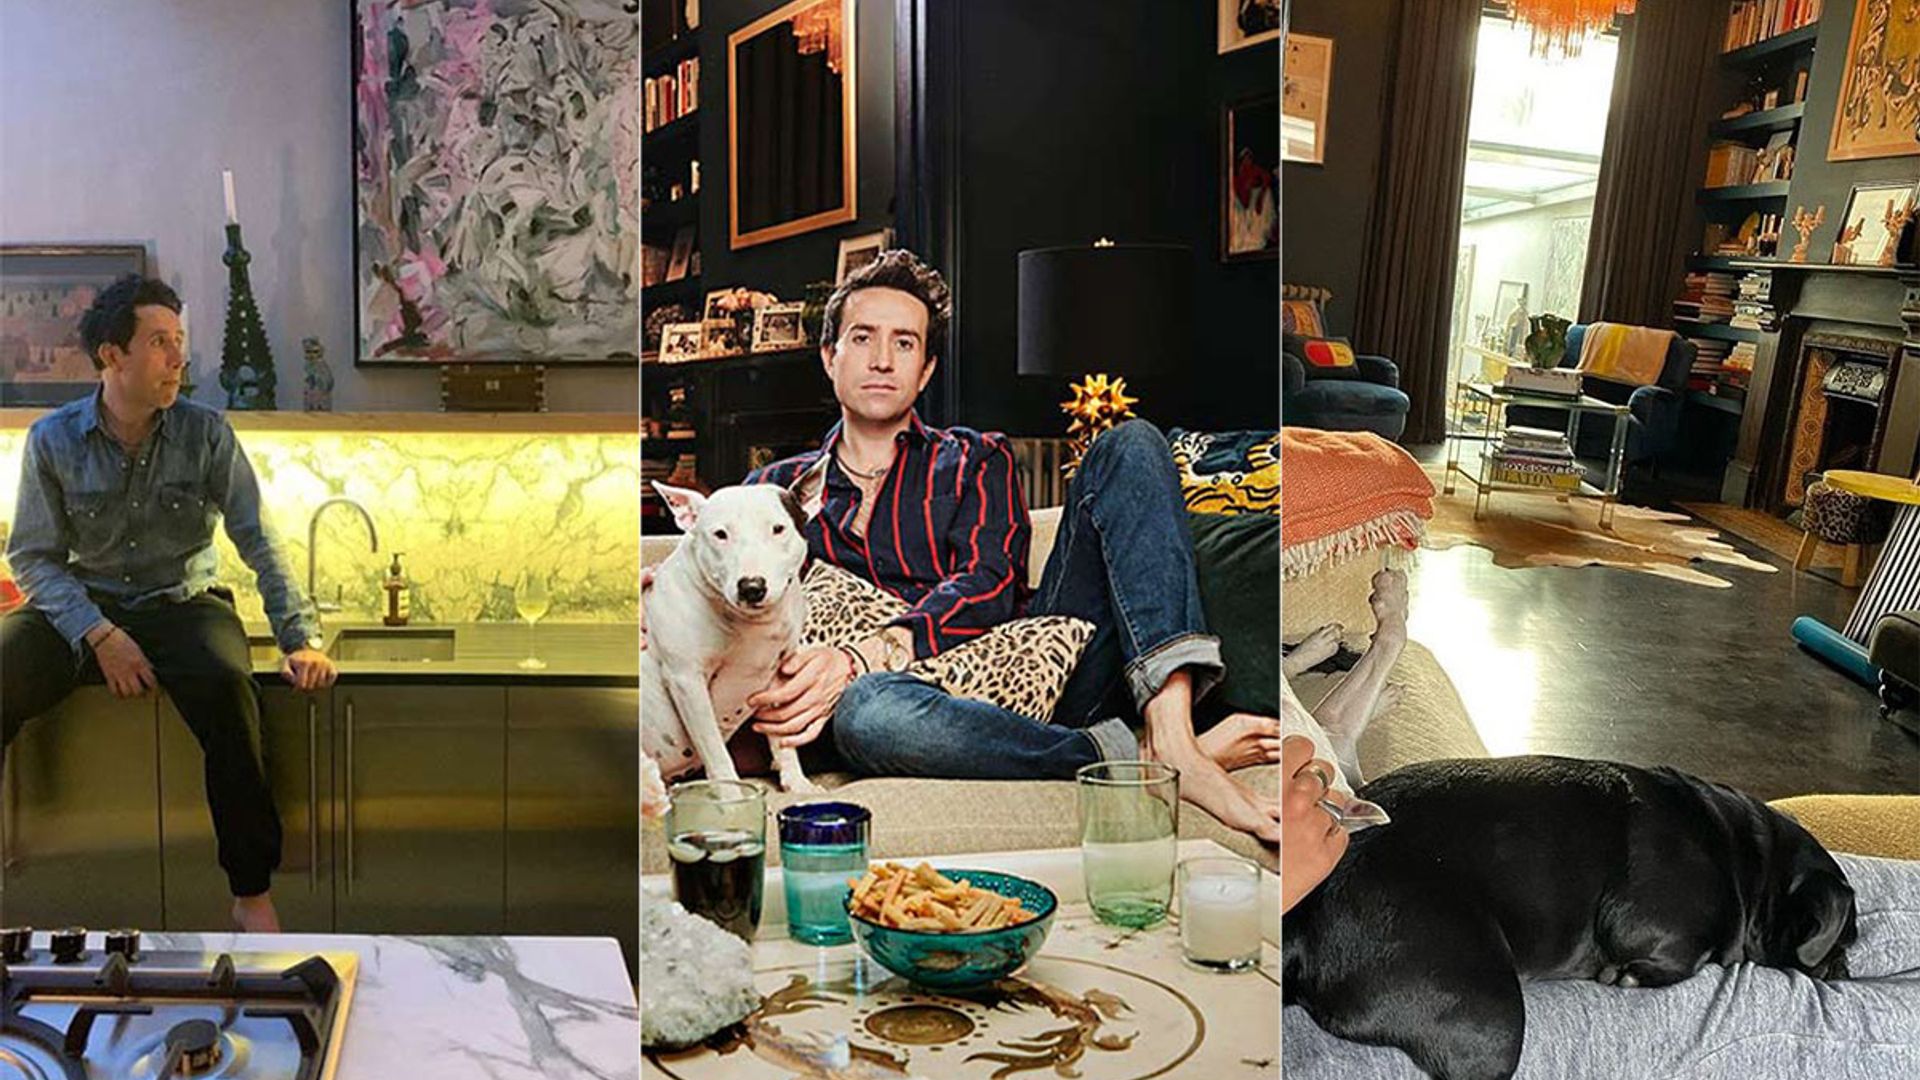 The Great Home Transformation star Nick Grimshaw's home is ultra-stylish – see inside